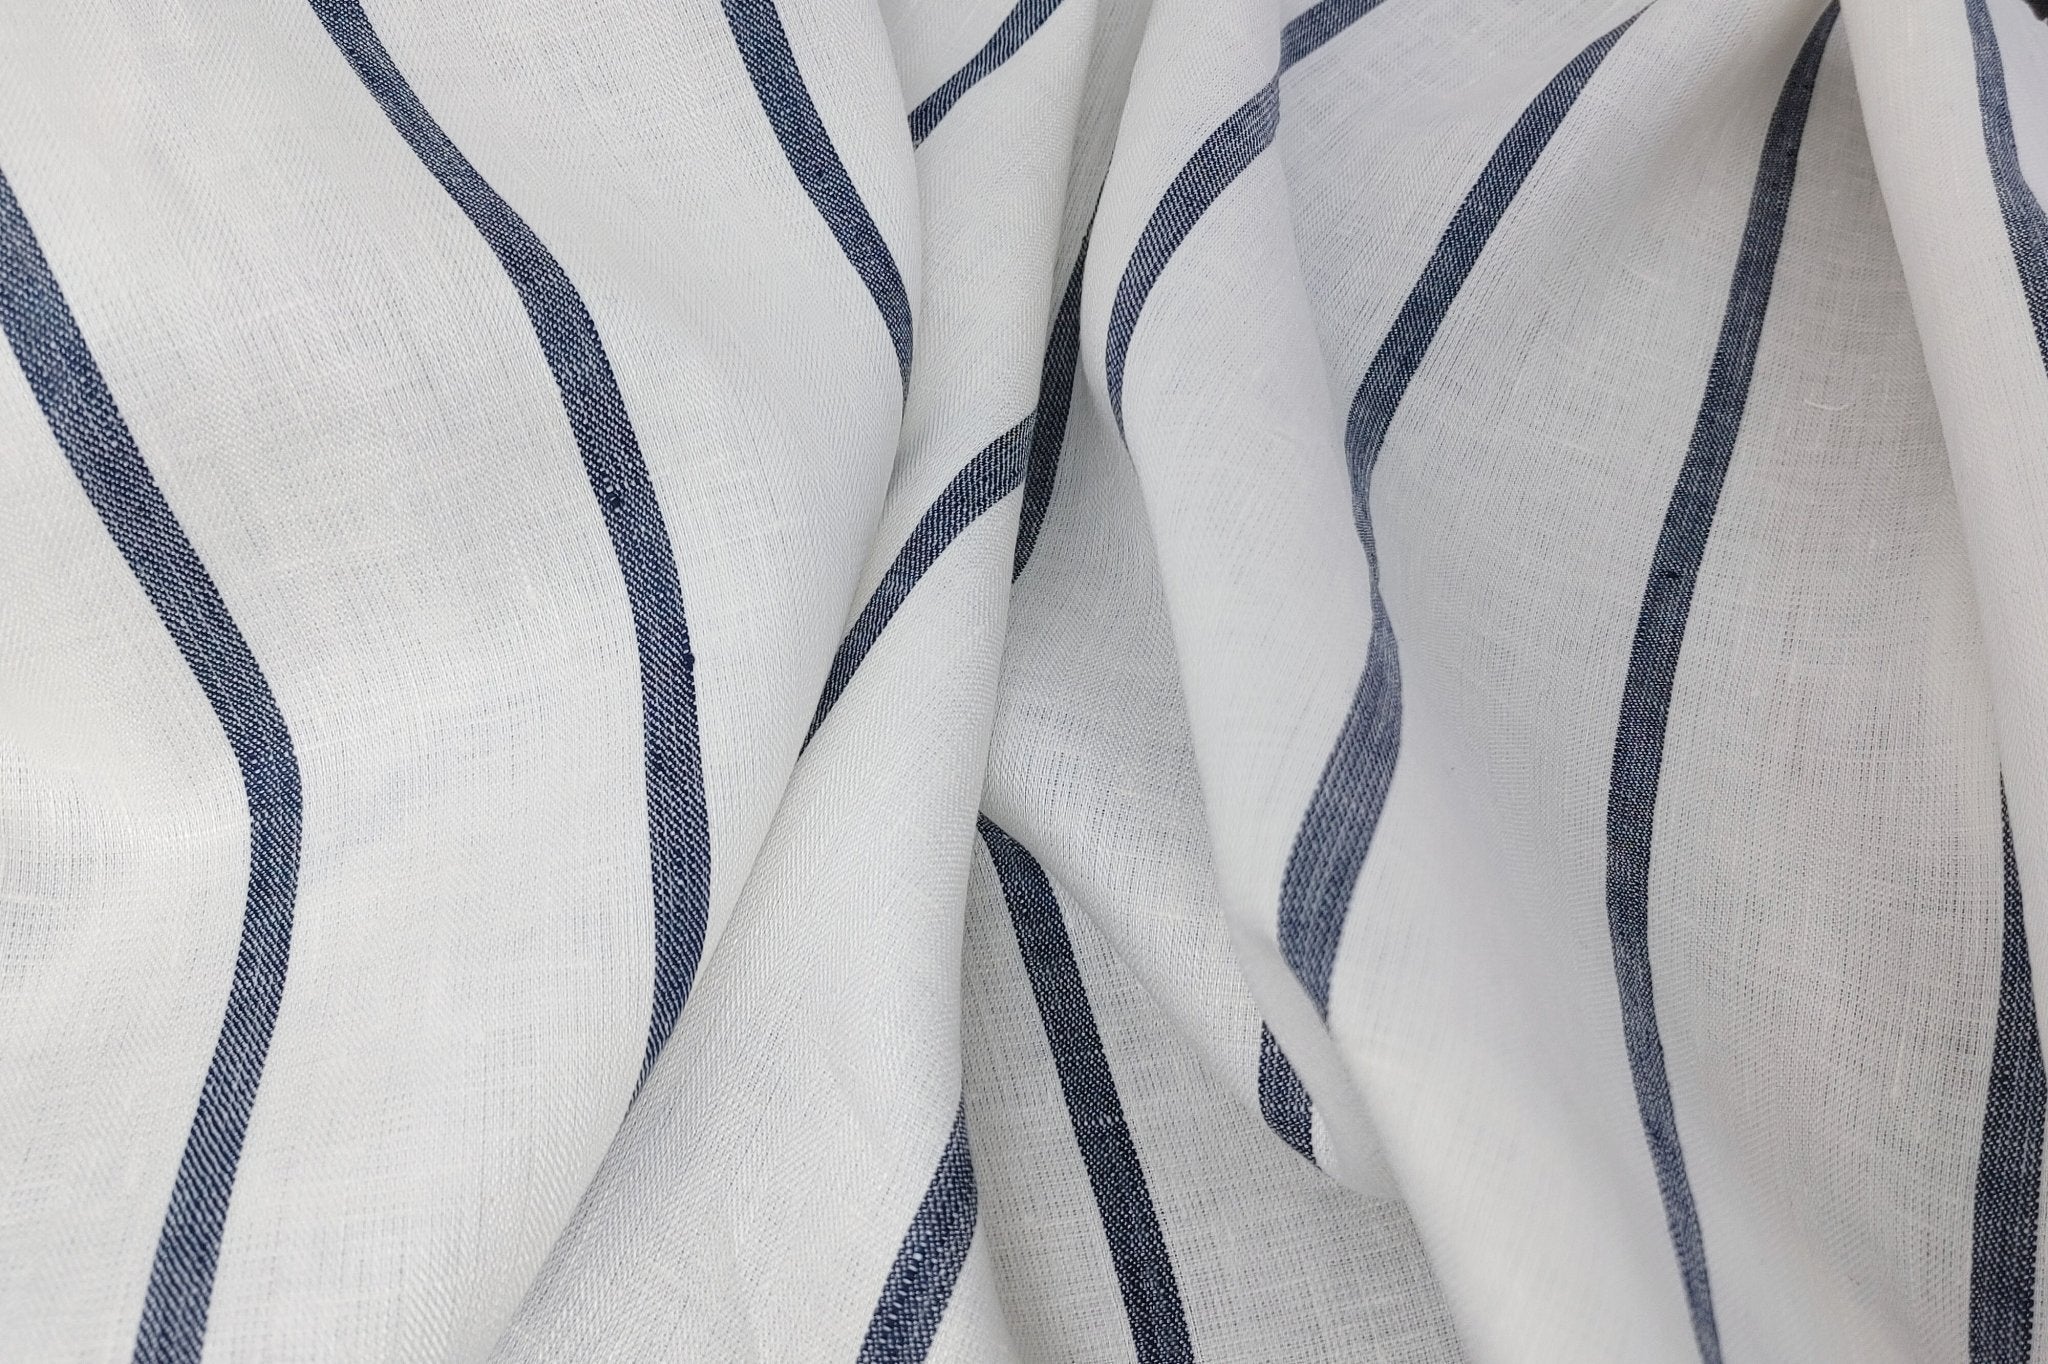 100% Linen HBT Fabric with White Base and Navy Stripe Pattern 4860 - The Linen Lab - Navy